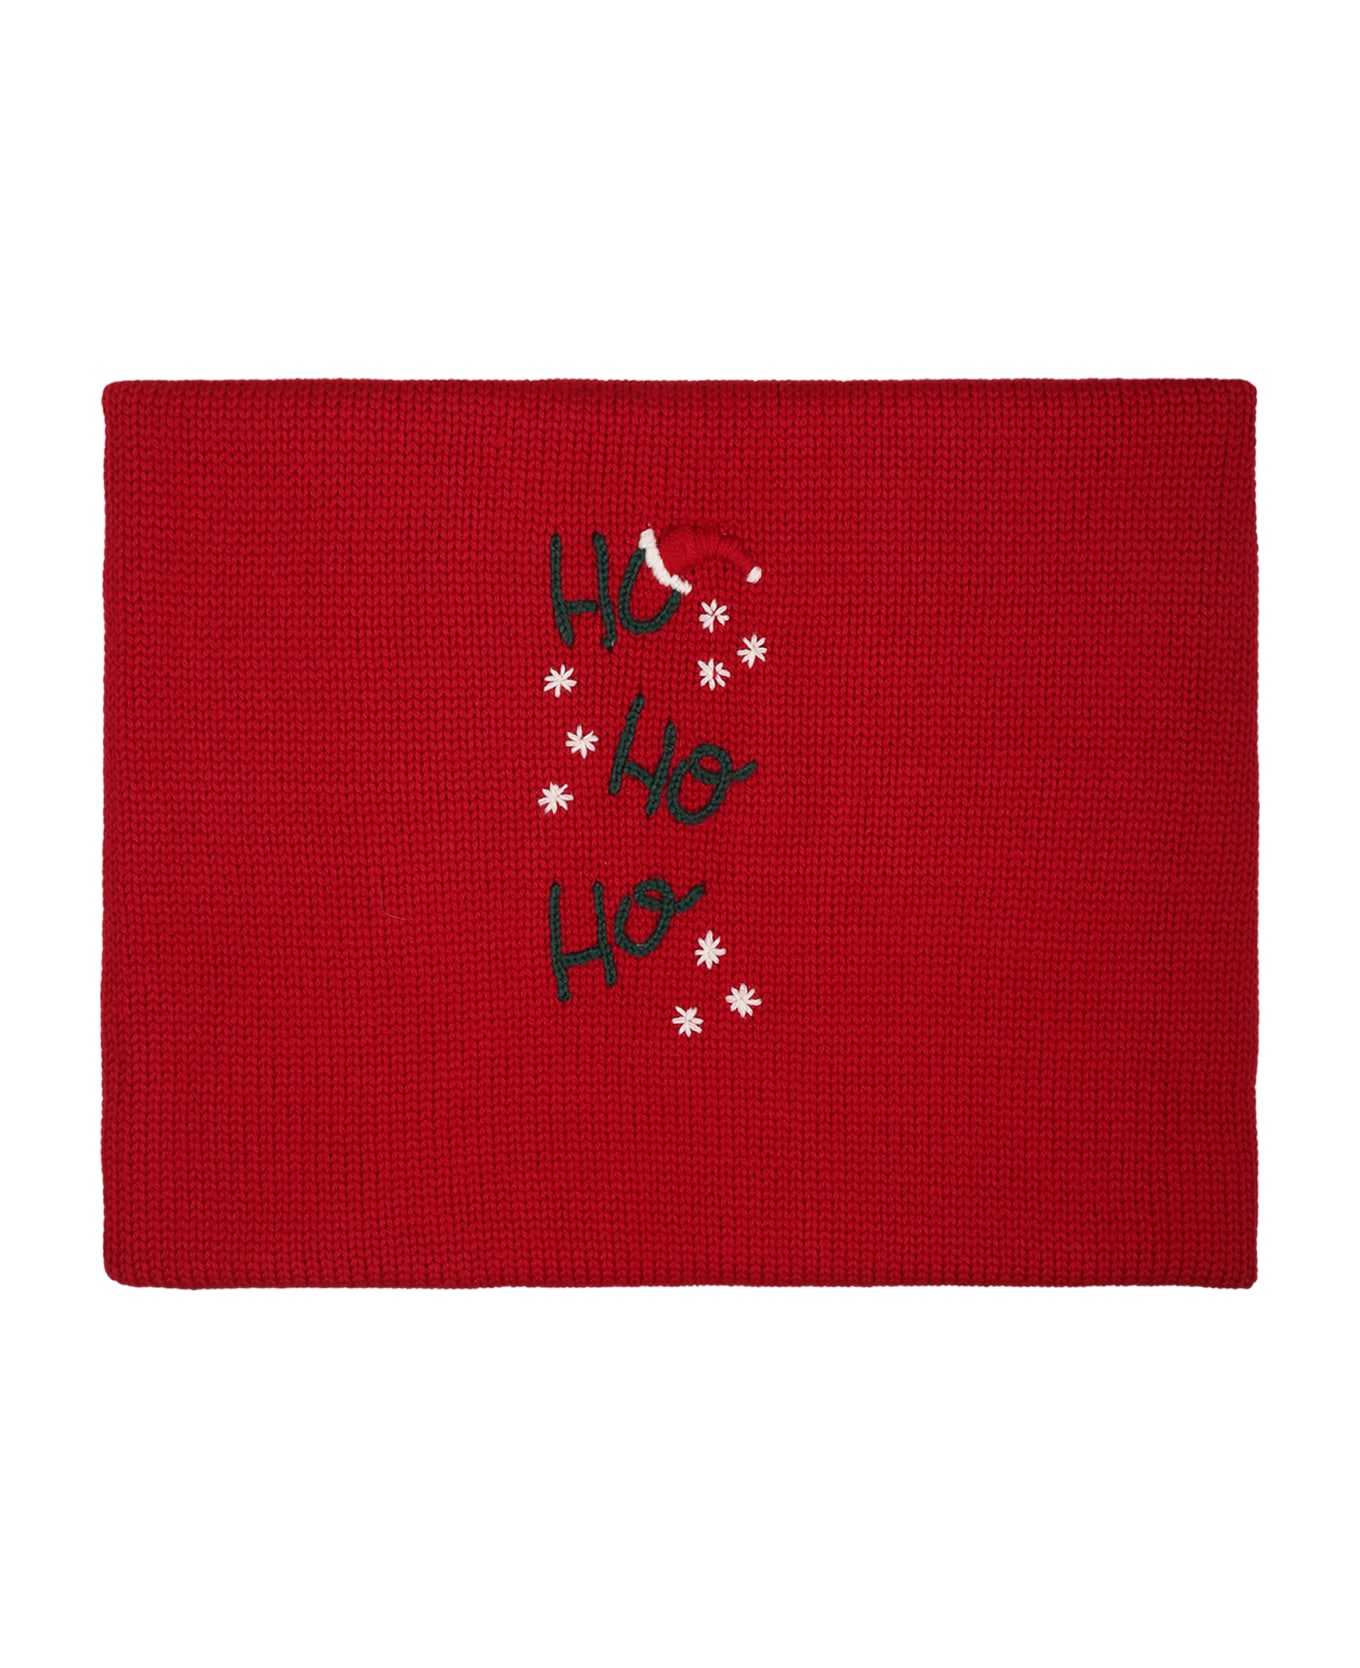 La stupenderia Red Blanket For Babykids With Writing - Red